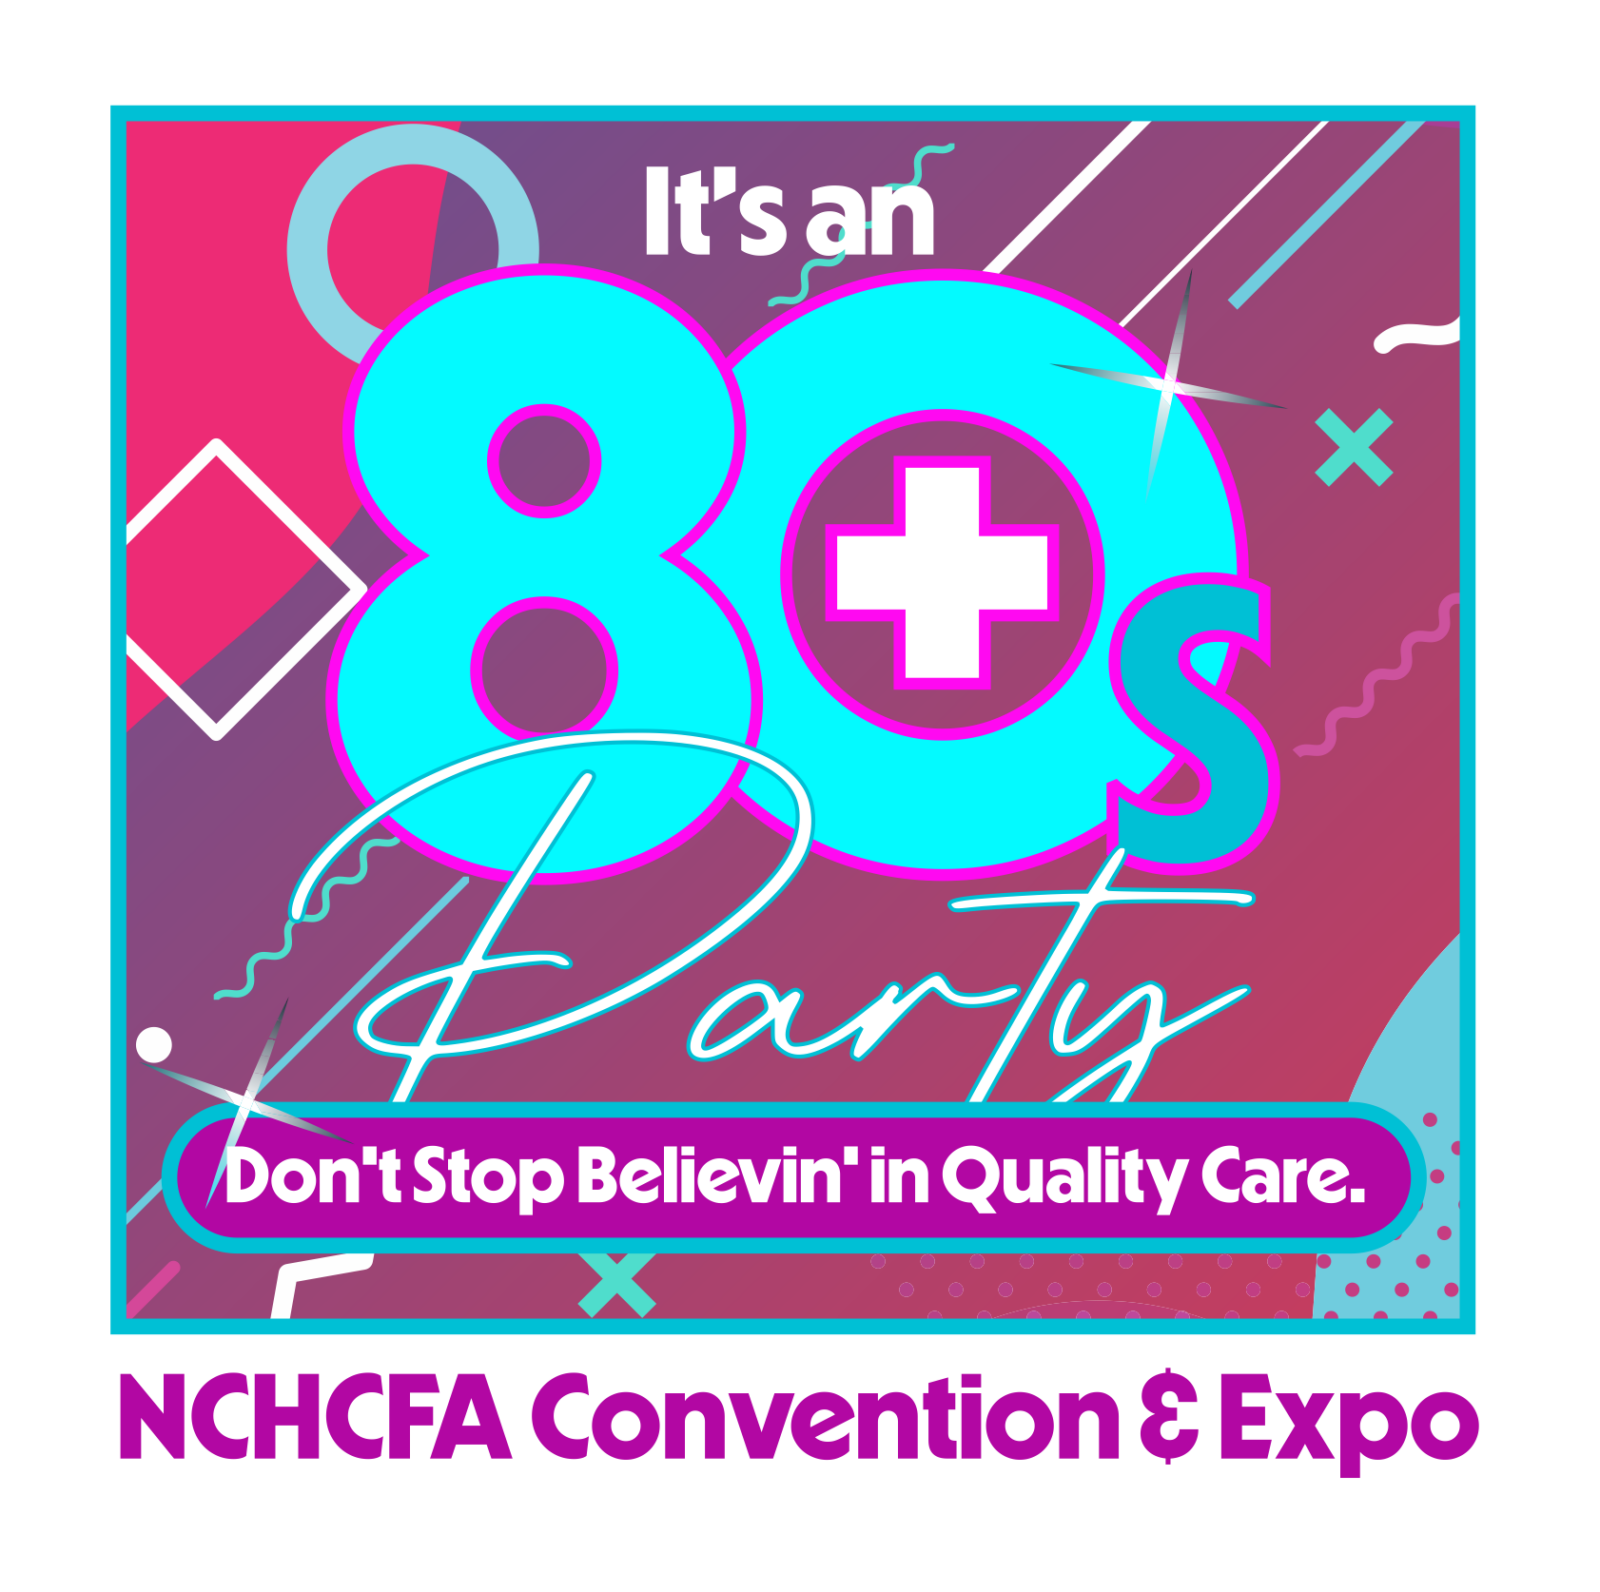 Convention & Expo graphic